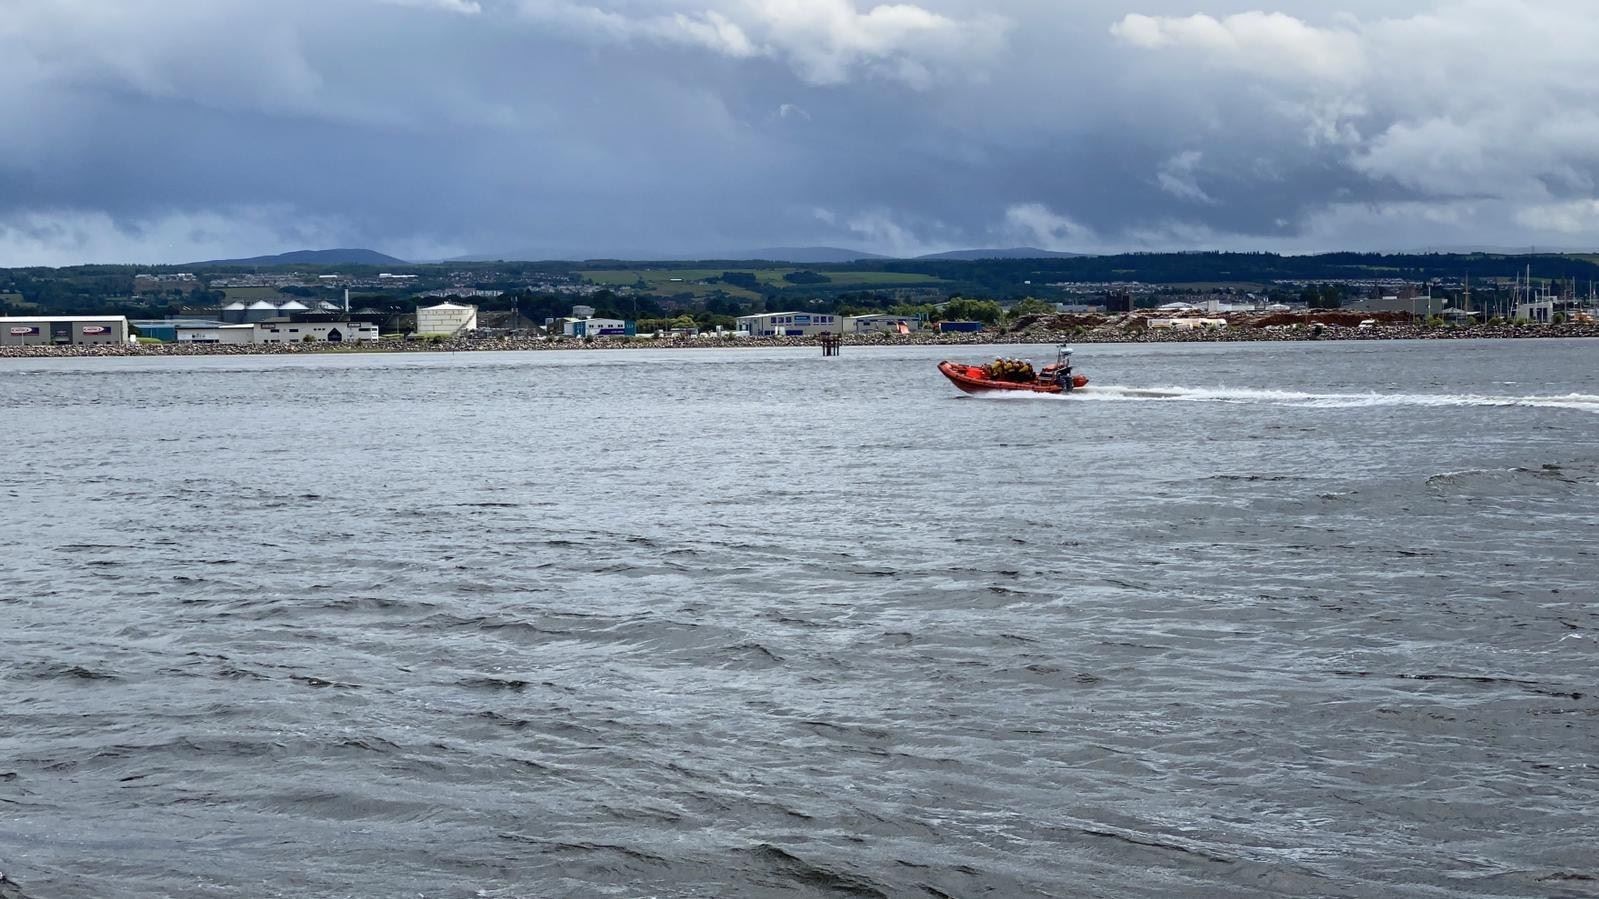 RNLI Kessock crew members responded to a distress call.